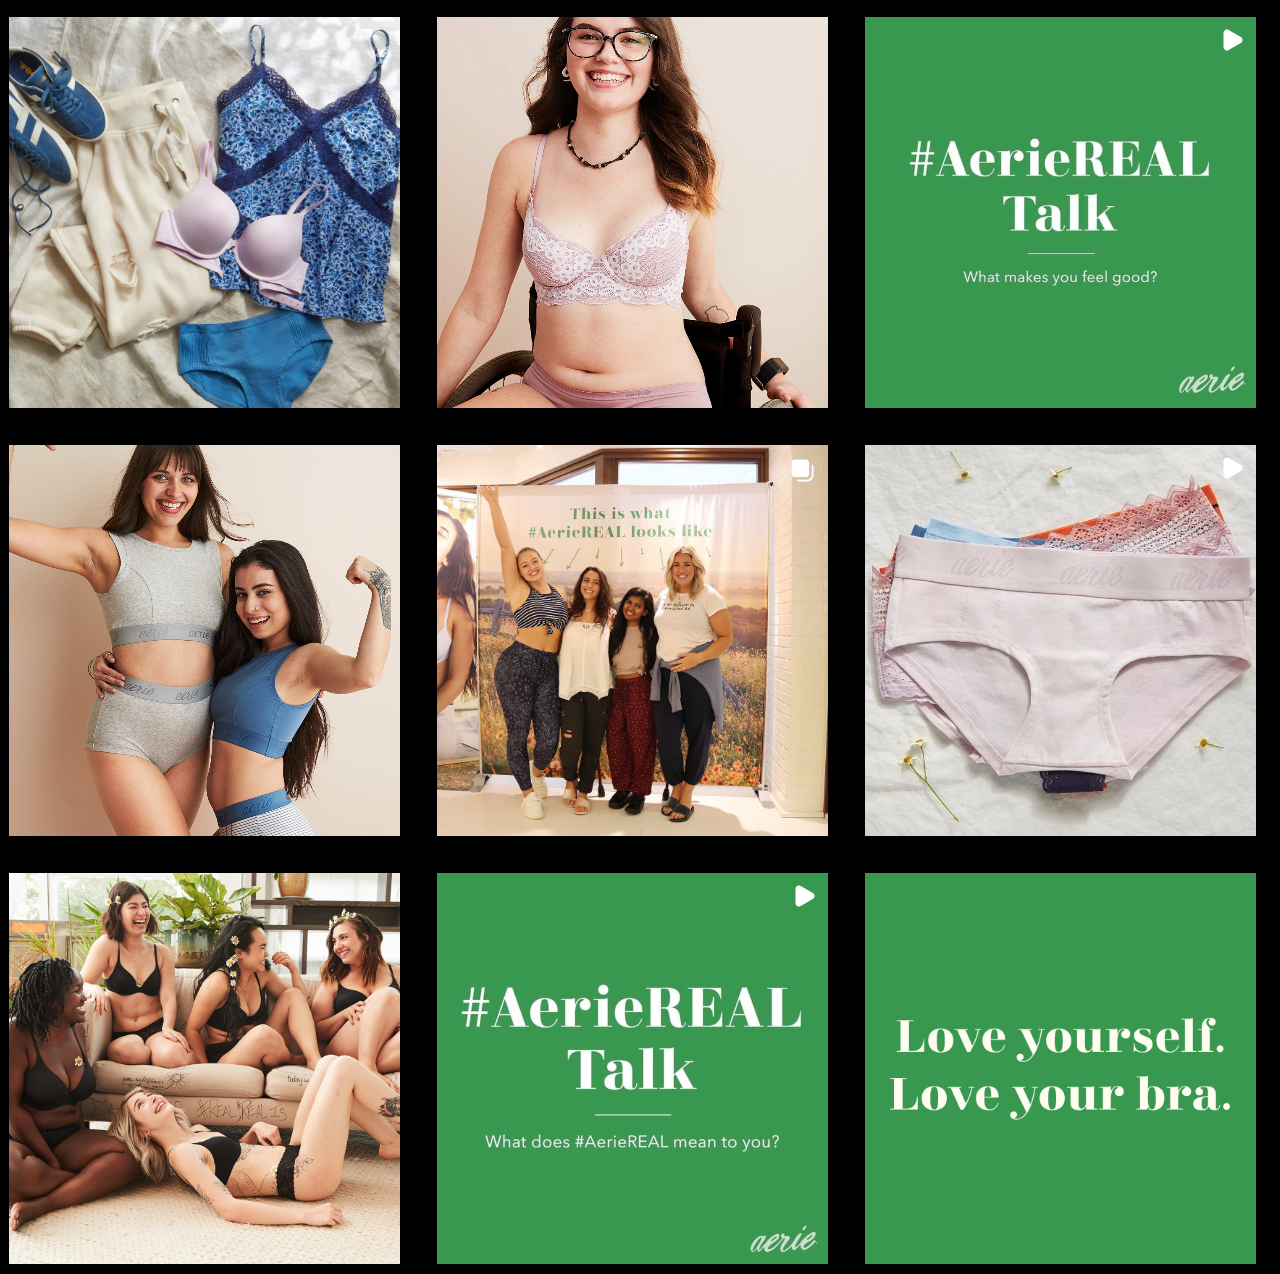 The #AerieREAL Campaign: Changing Women's Empowerment … One Bra at a Time, by Chloe Hart